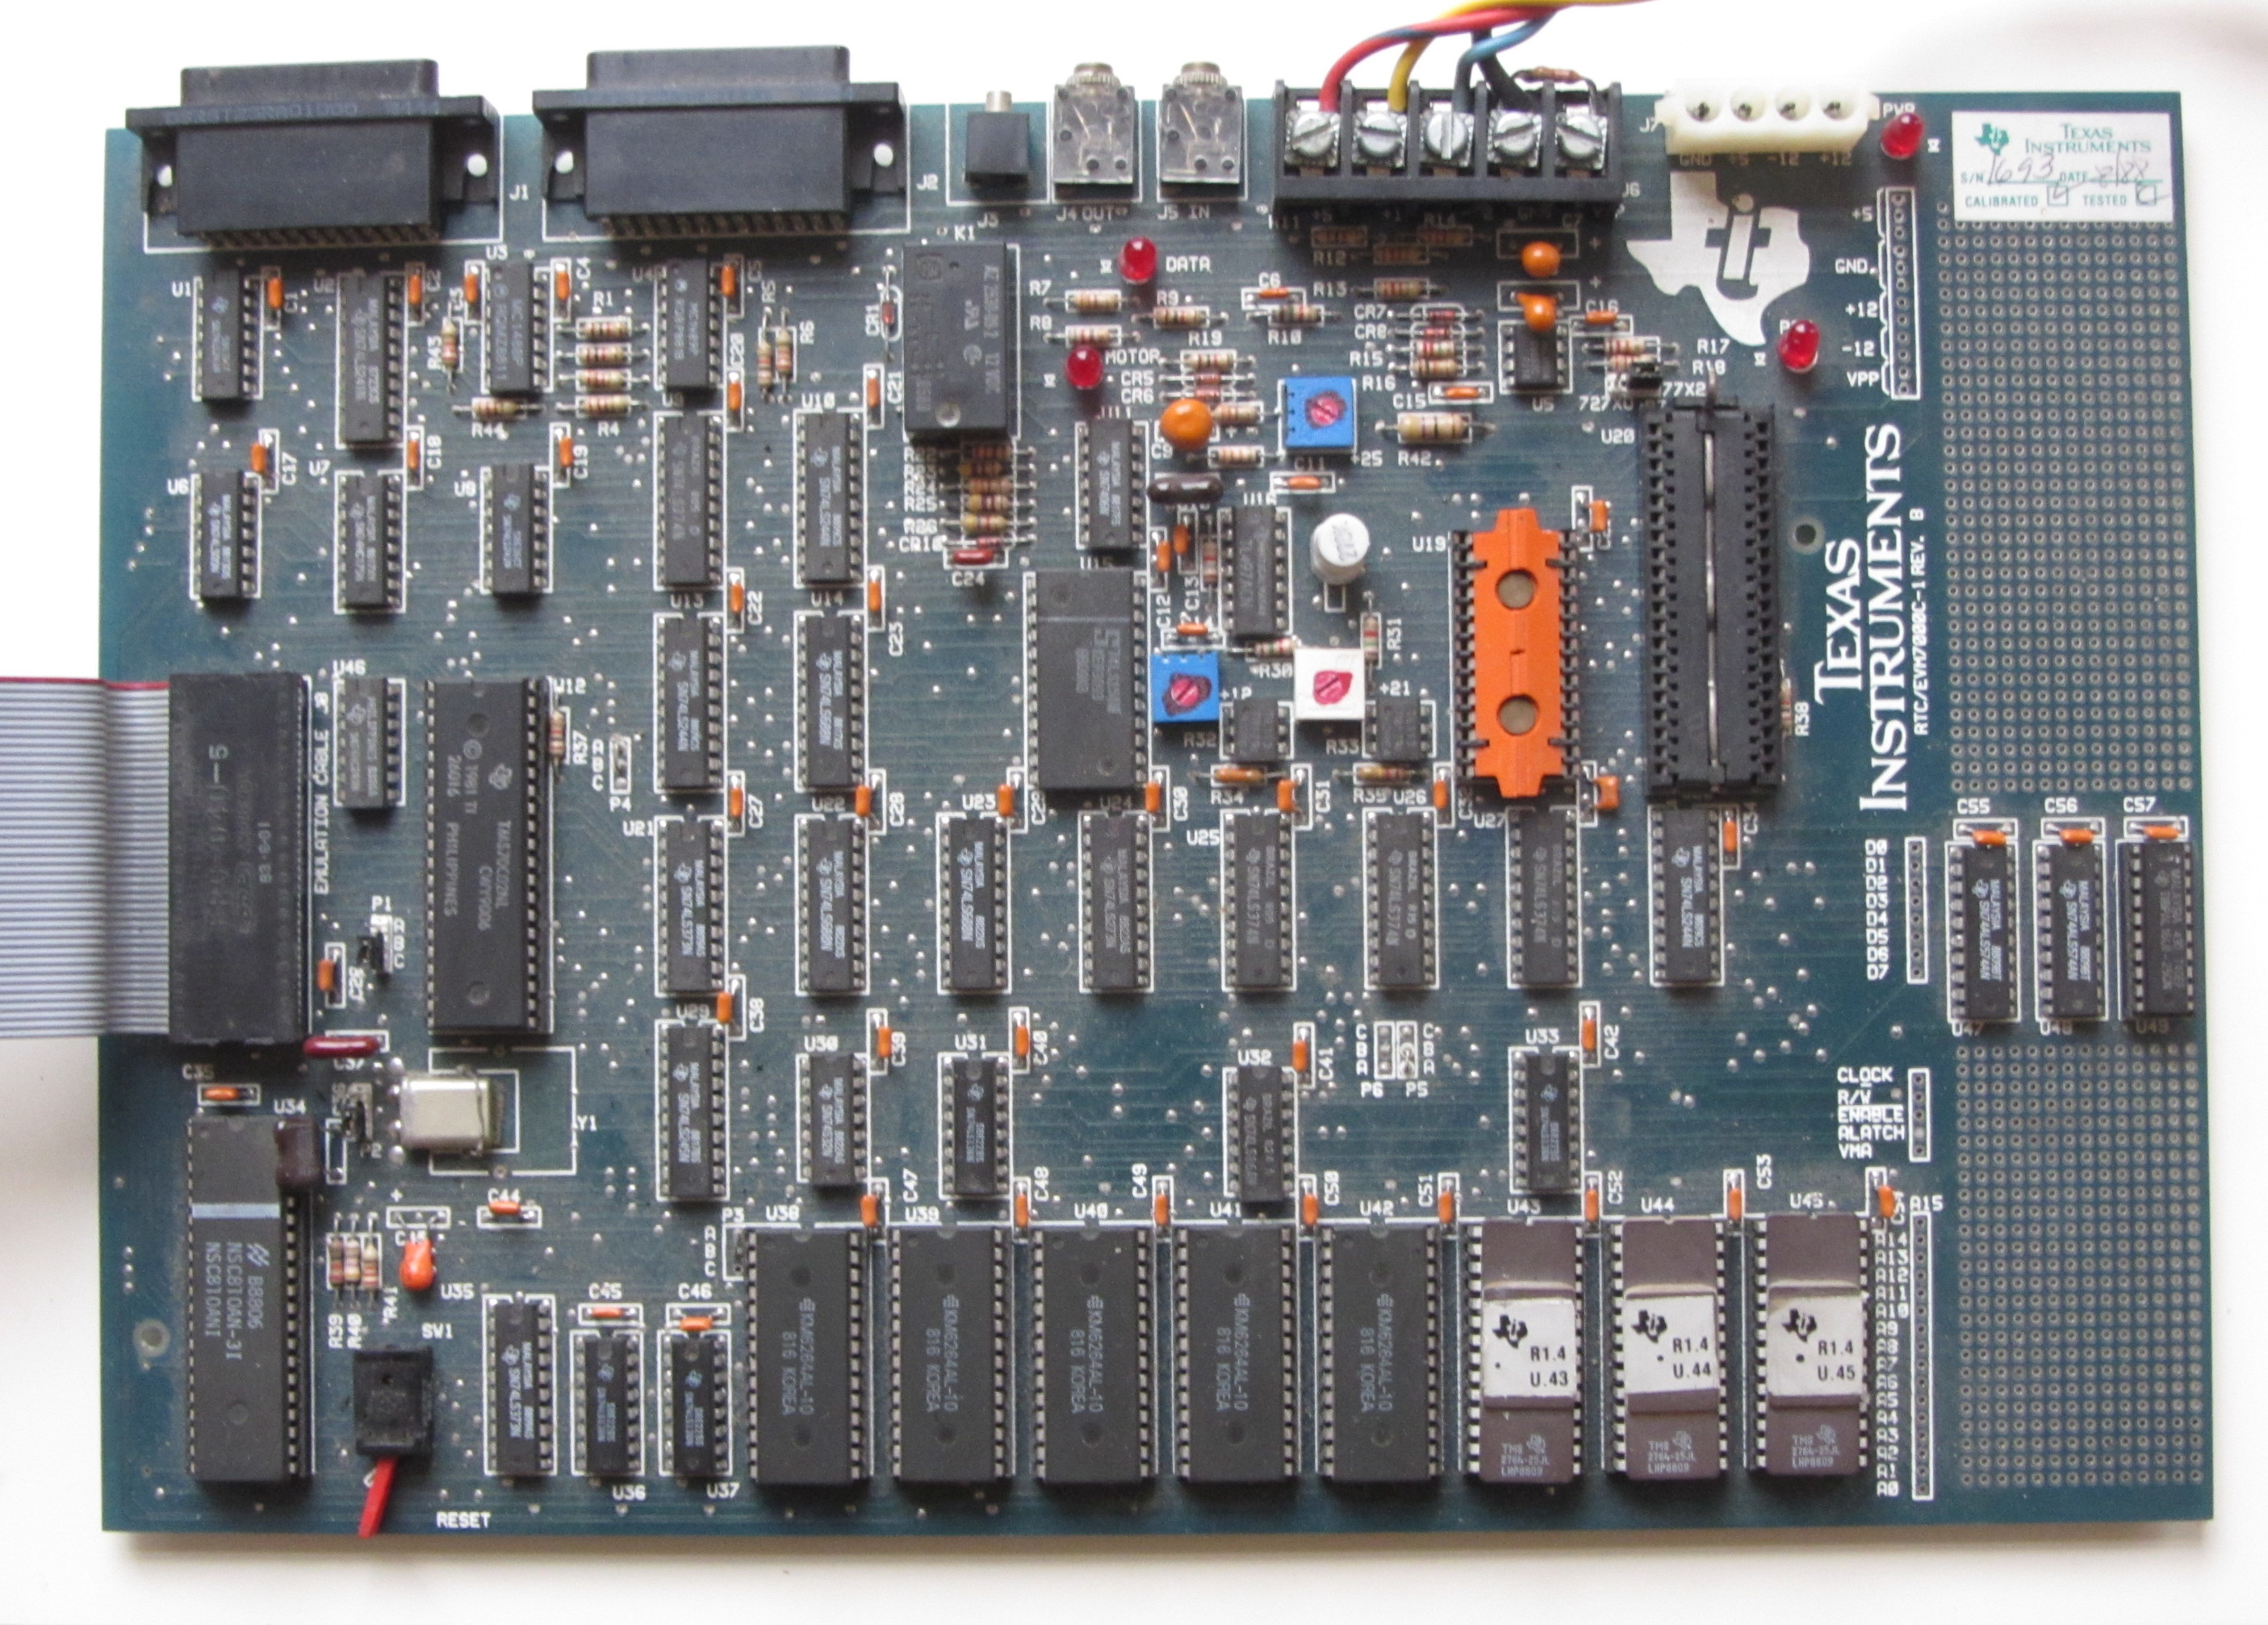 Texas Instruments evaluation board for the TMS70Cx2 processors